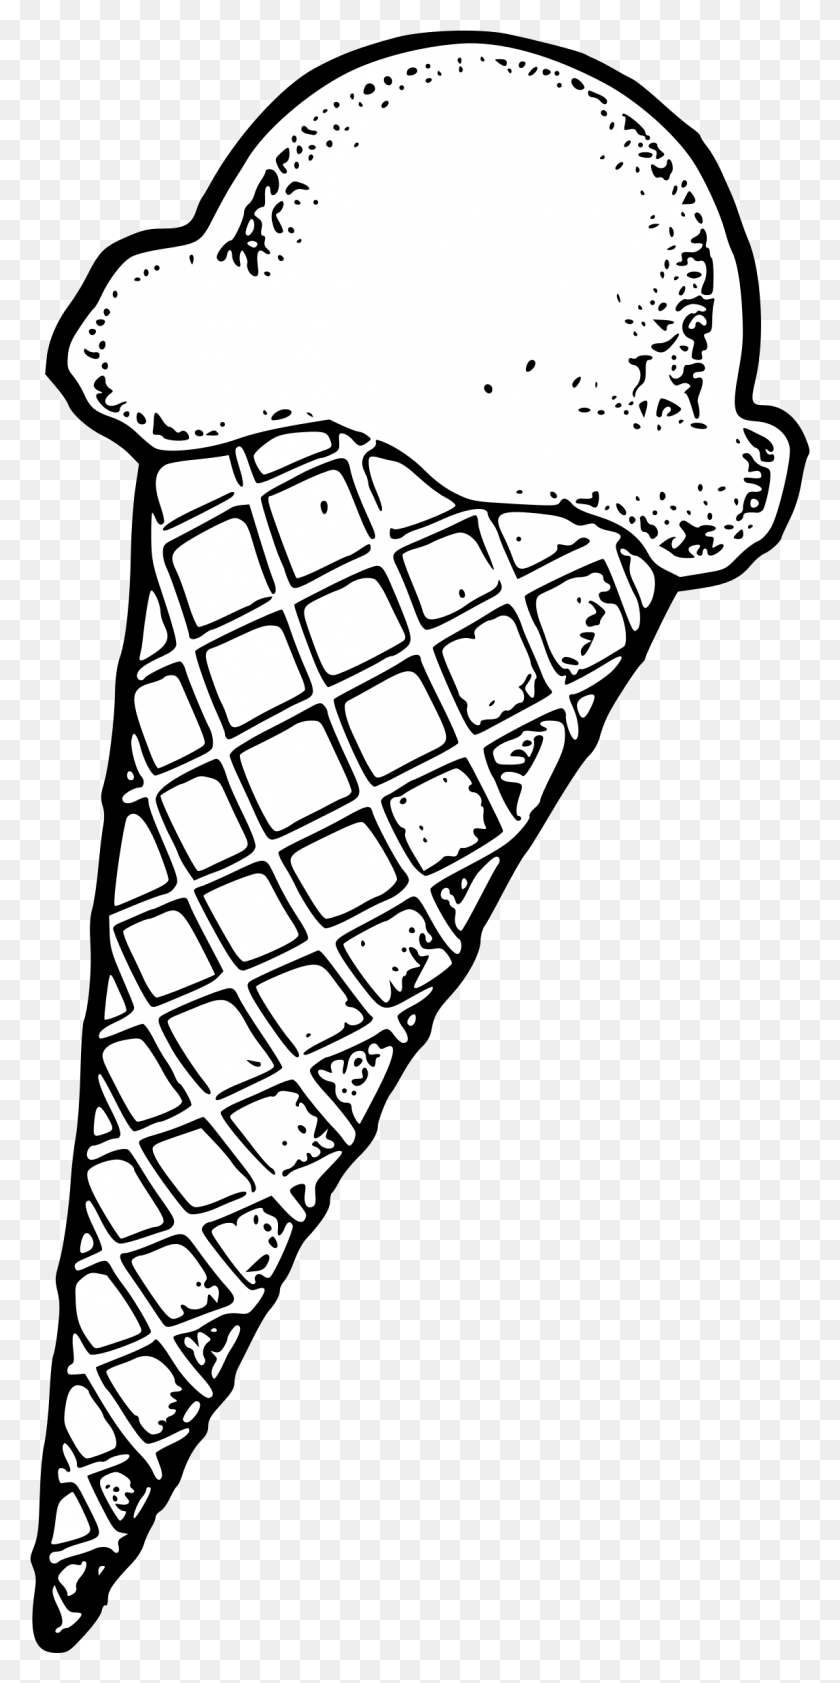 1148x2389 Ice Cream Clipart Single Free Clipart On Dumielauxepices Inside - Cone Clipart Black And White